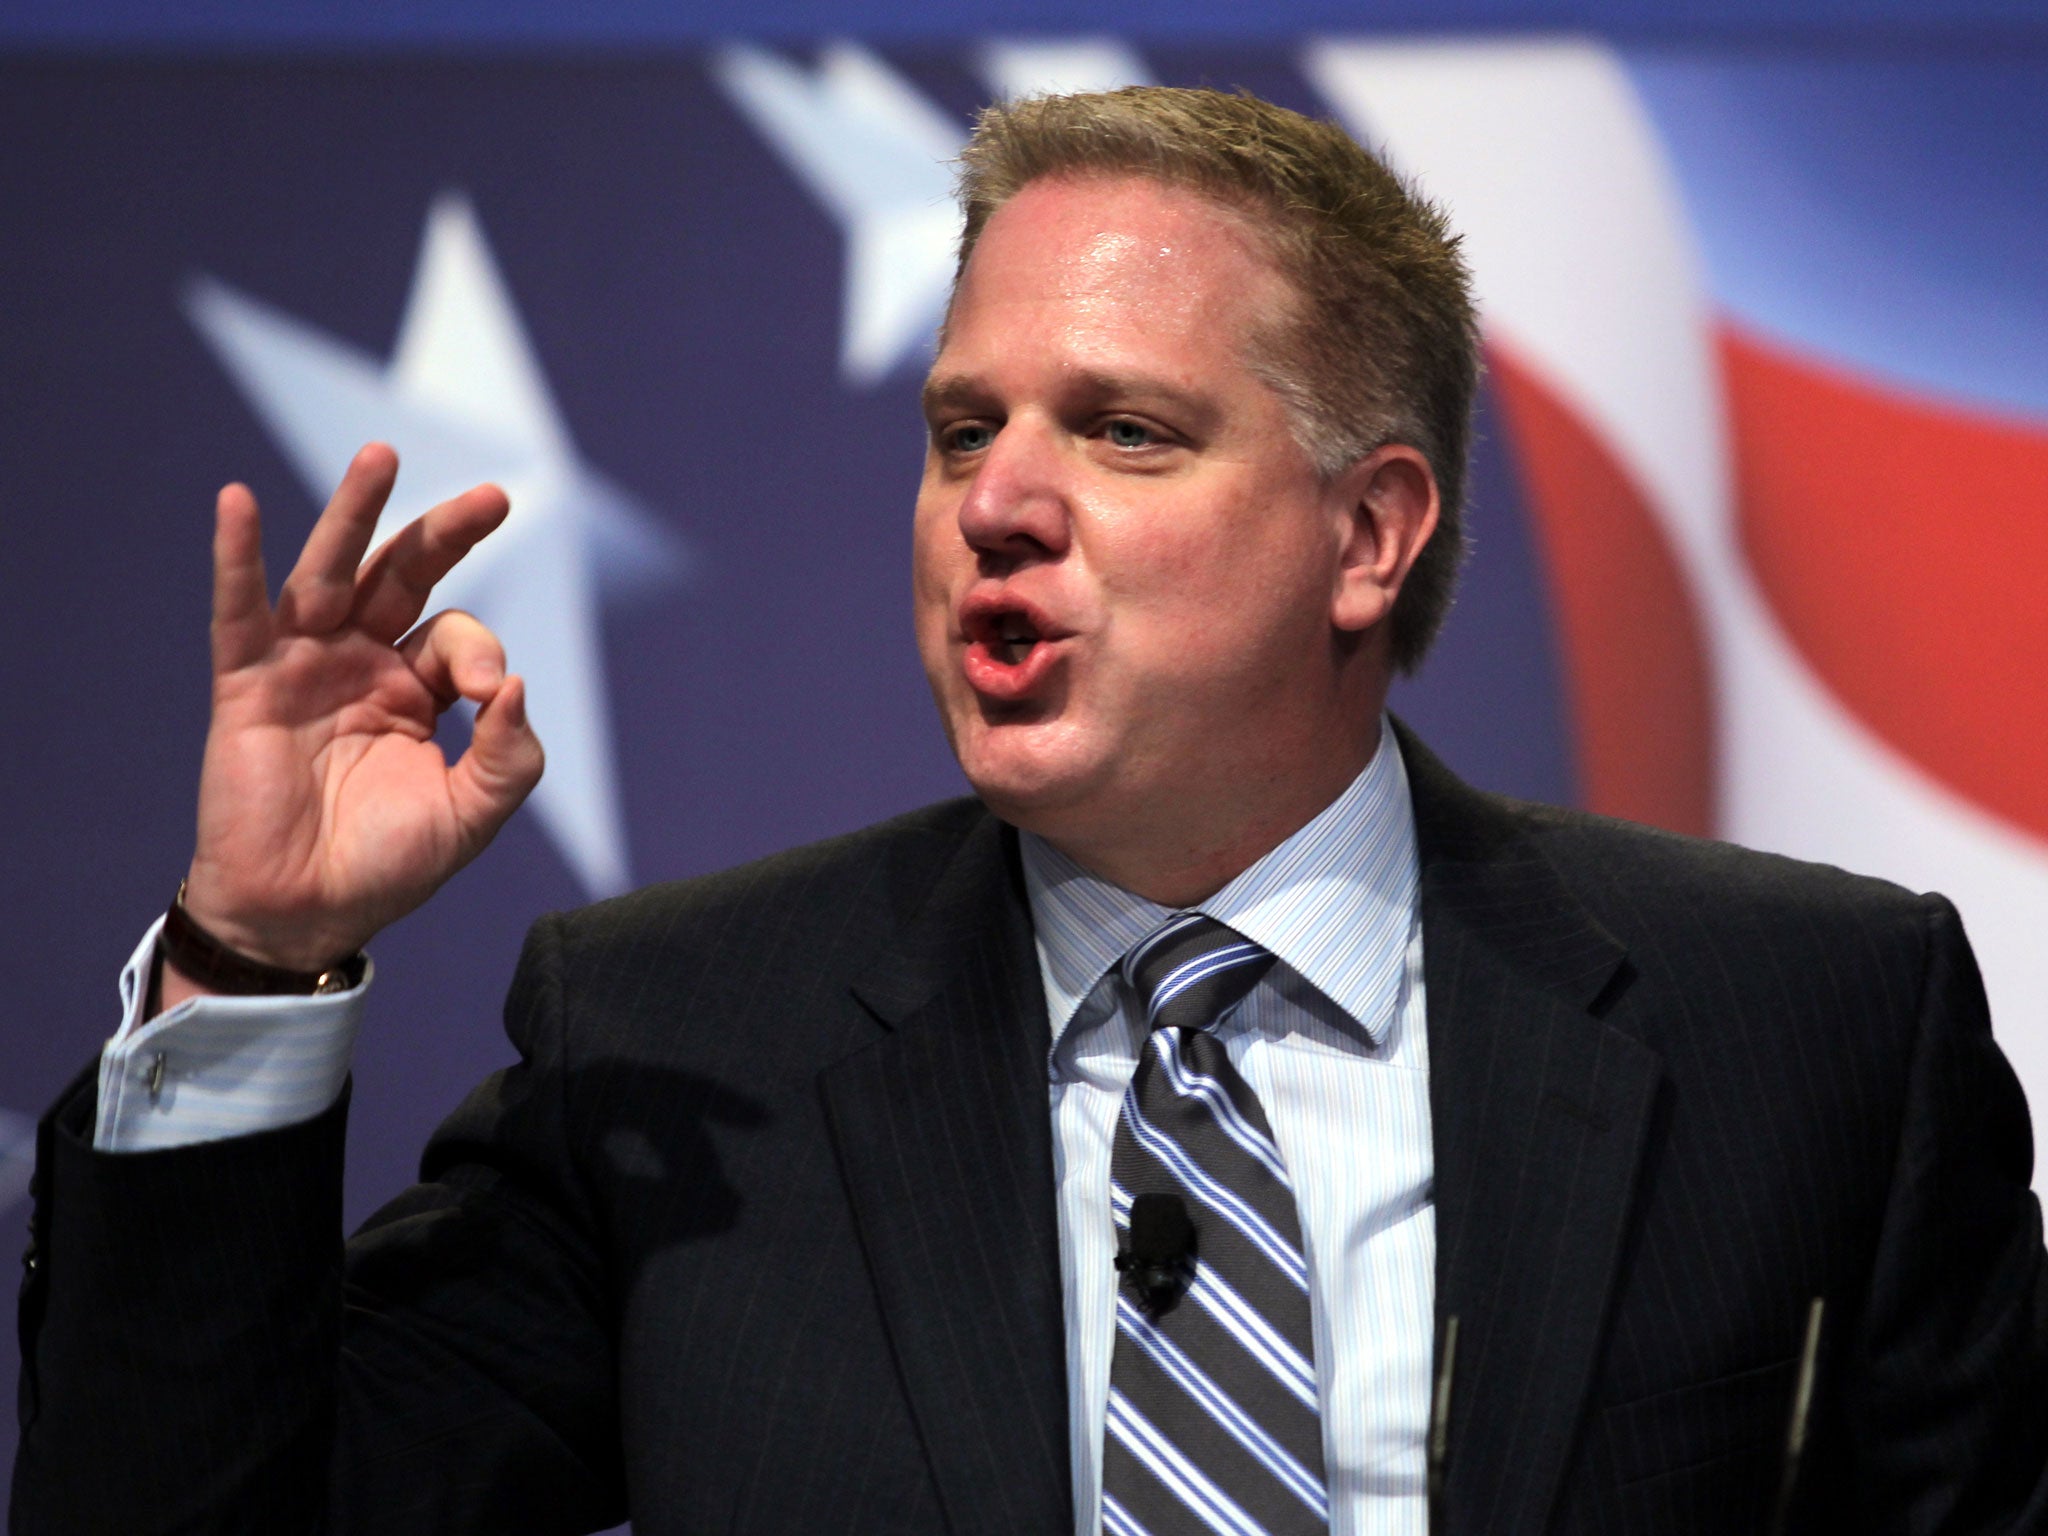 Glenn Beck: Between 2009 and 2011, when he appeared daily on Fox News, Beck was the public face of the Tea Party.